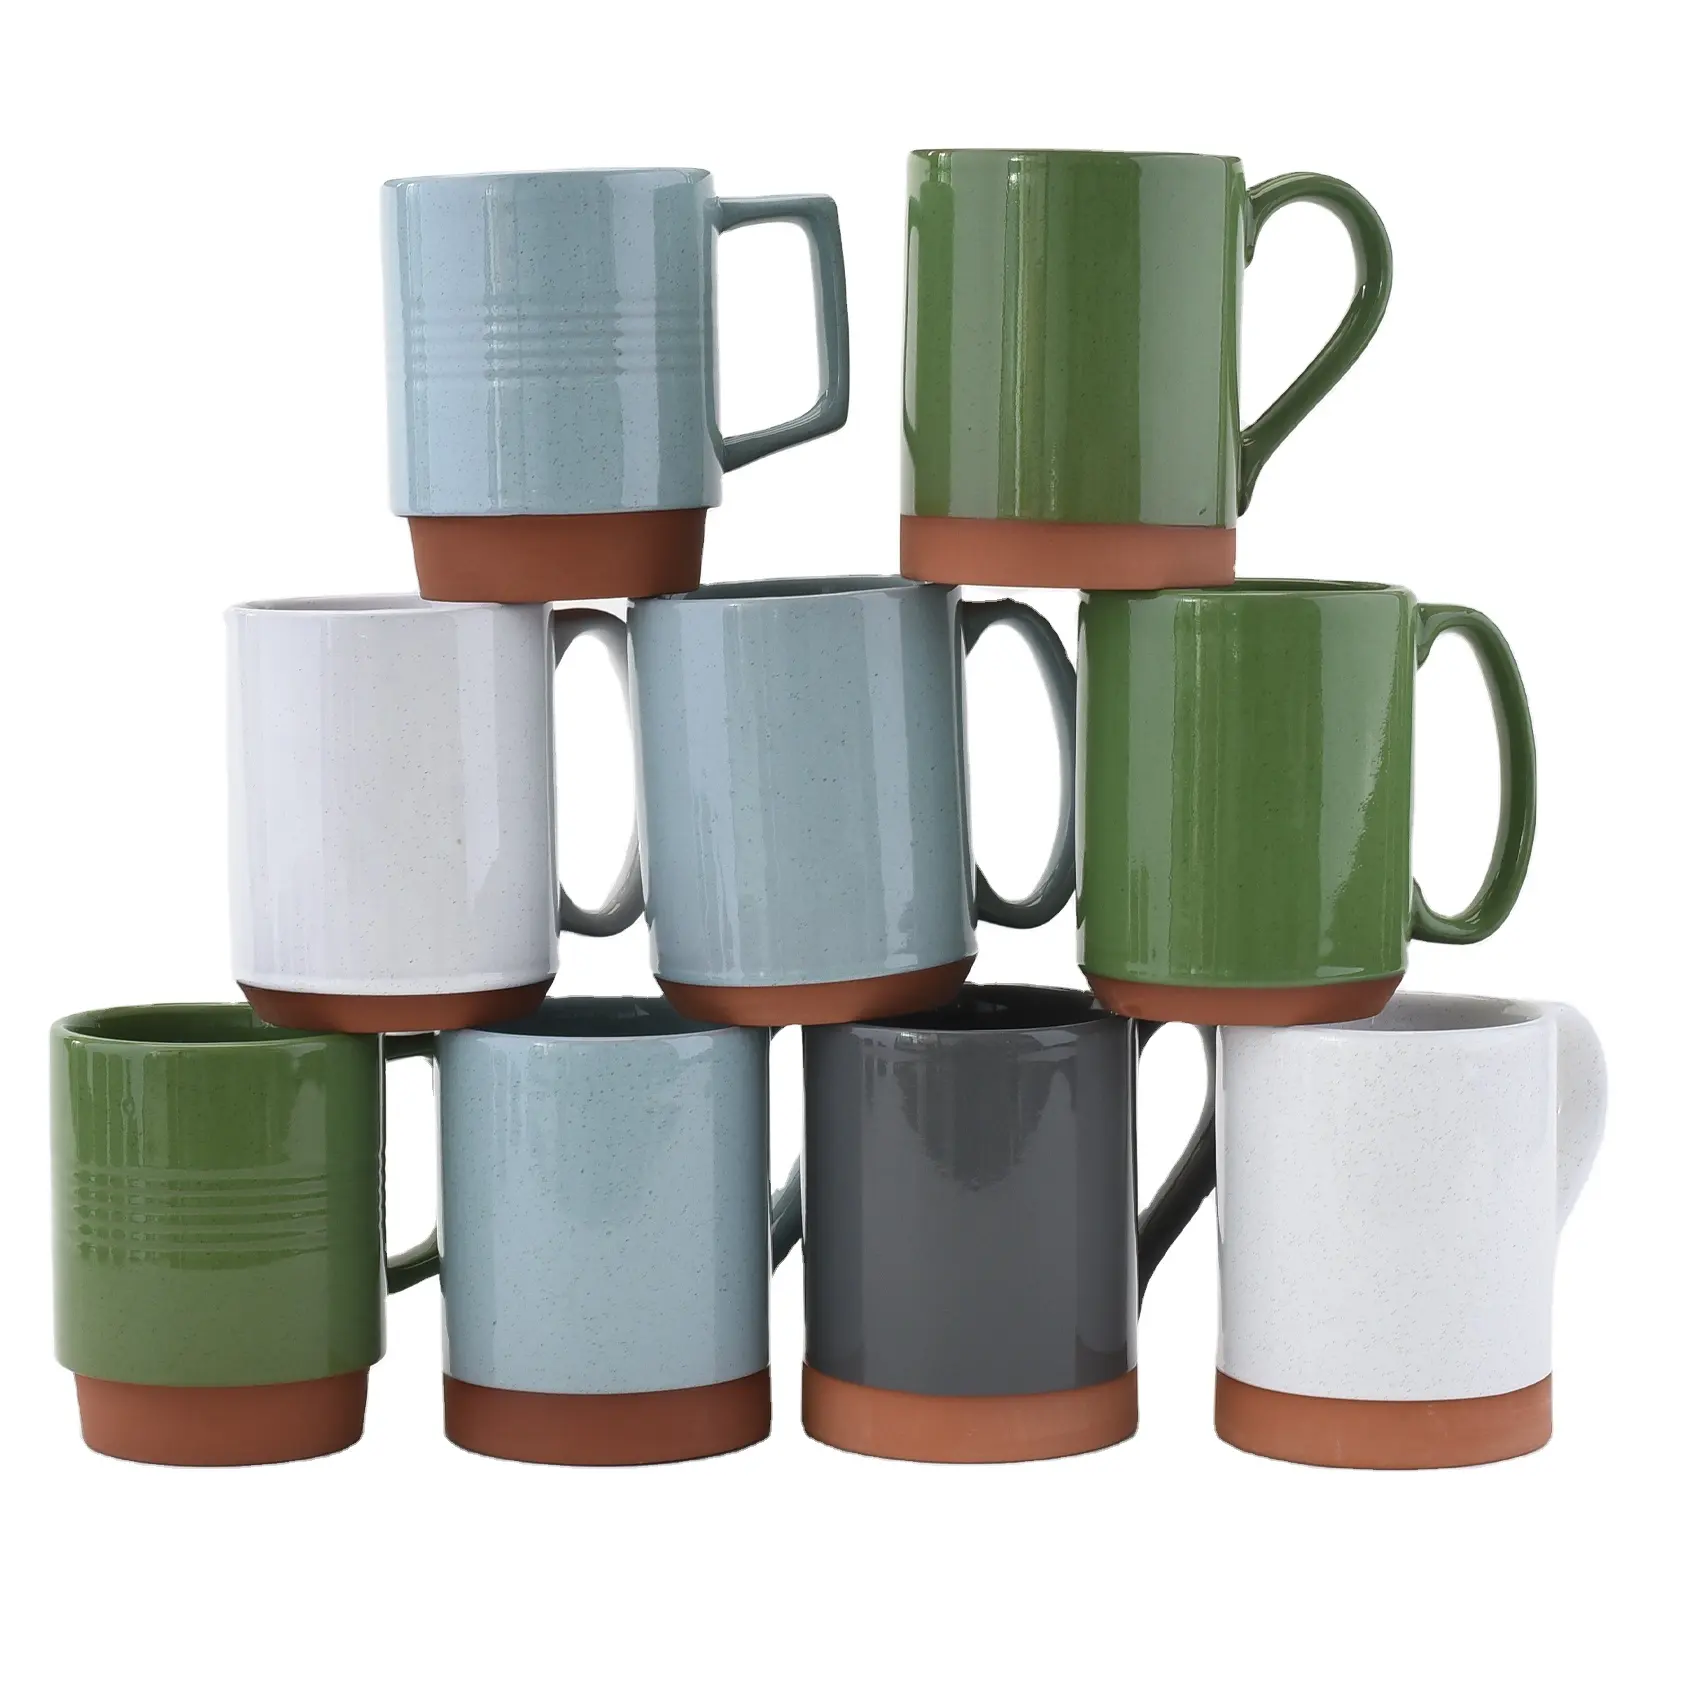 Custom Large Speckled Campfire Terracotta Green Coffee Mugs 18 OZ Ceramic Tea Cups With Handle Lid